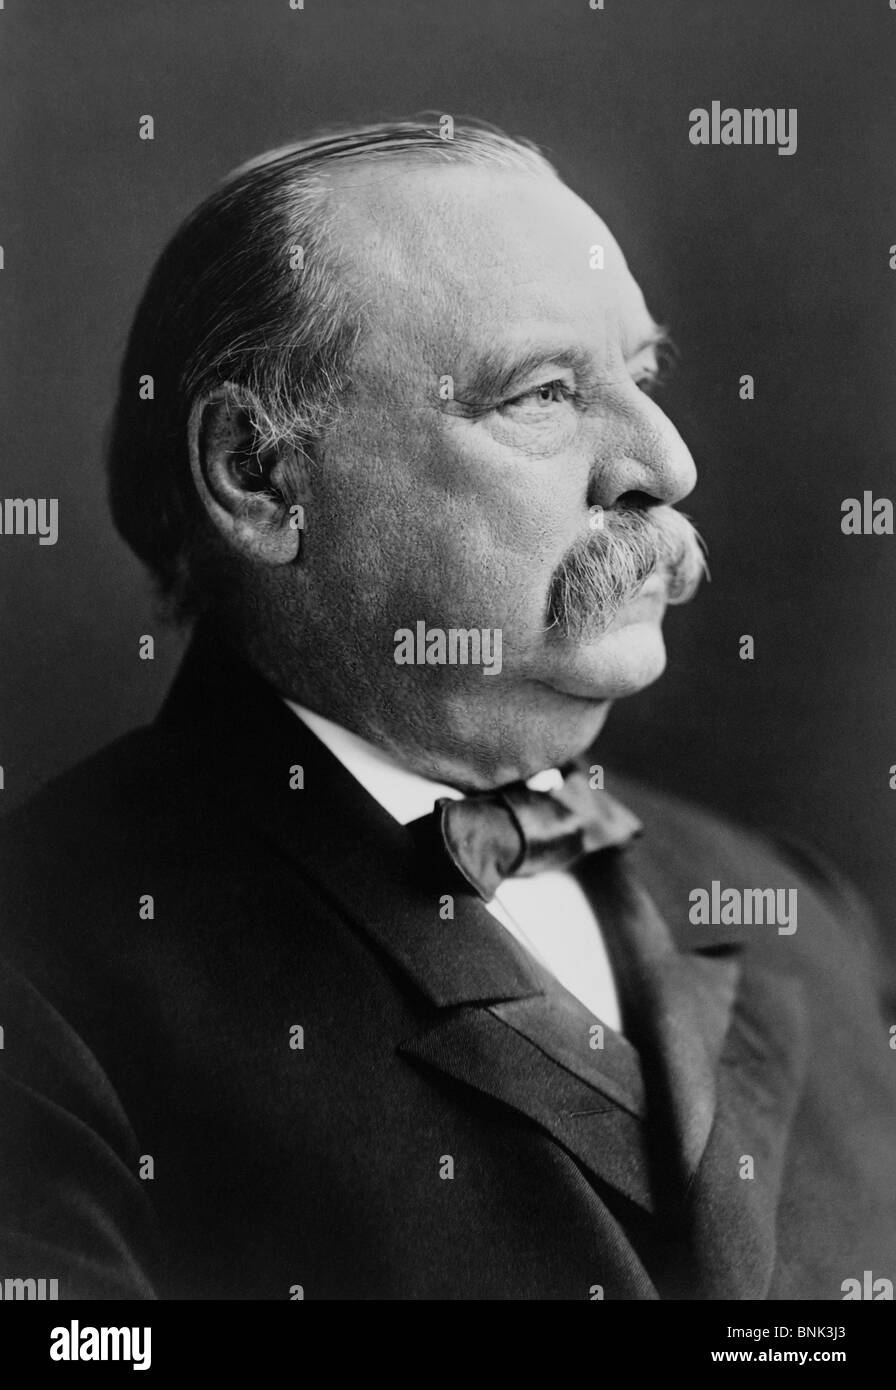 Portrait photo circa 1903 of Grover Cleveland (1837 - 1908) - the 22nd and 24th US President (1885 - 1889 and 1893 - 1897). Stock Photo